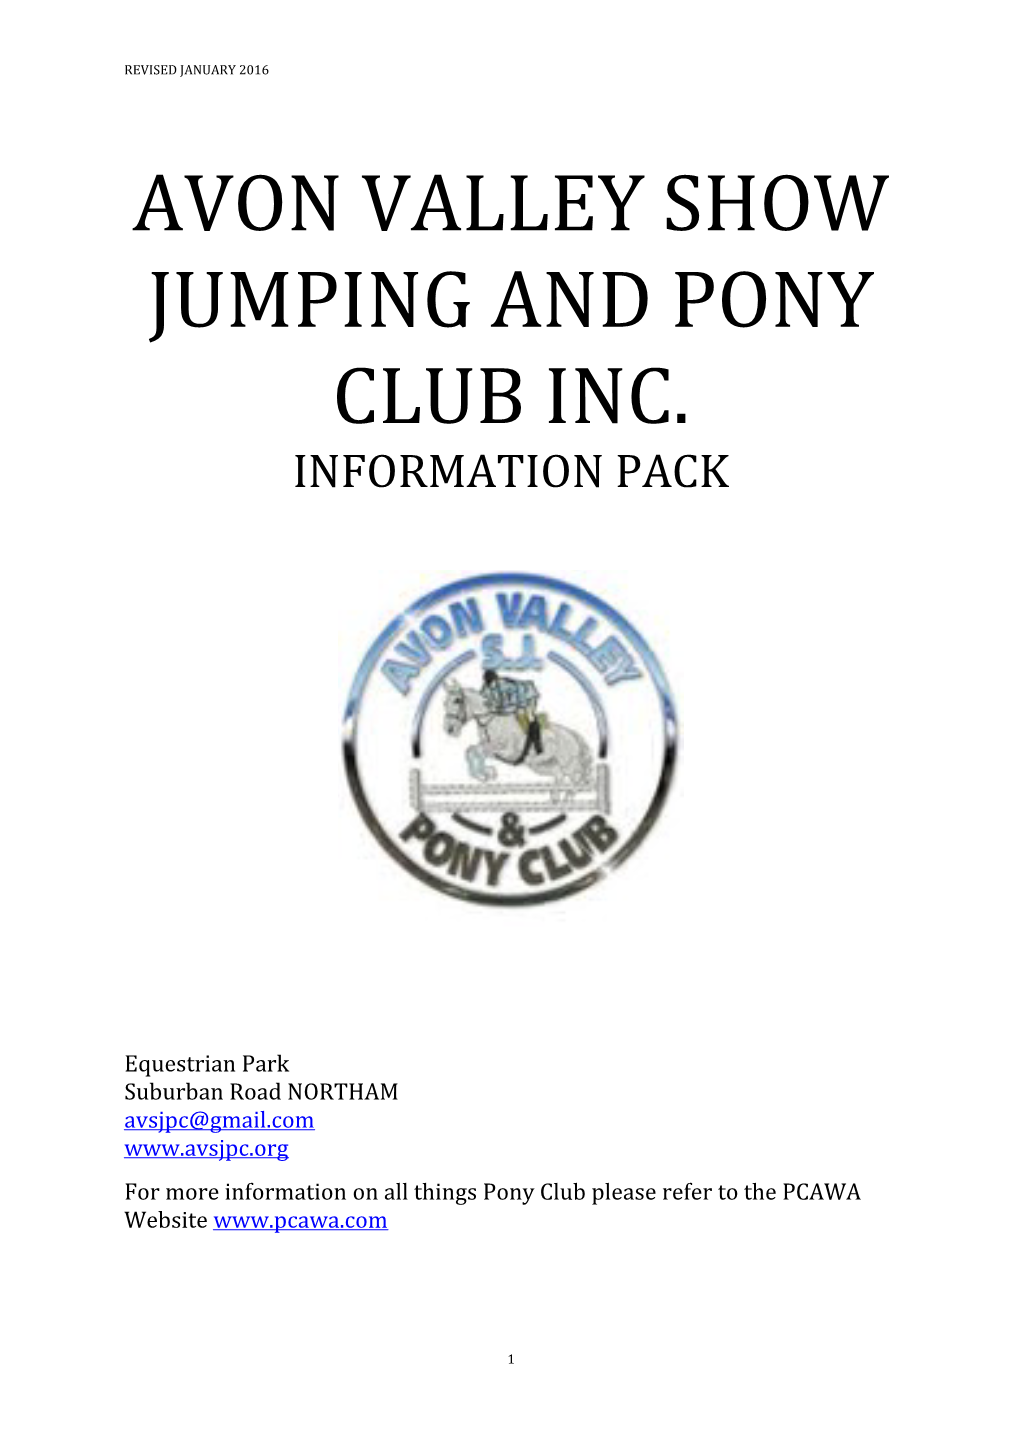 Avon Valley Show Jumping and Pony Club Inc